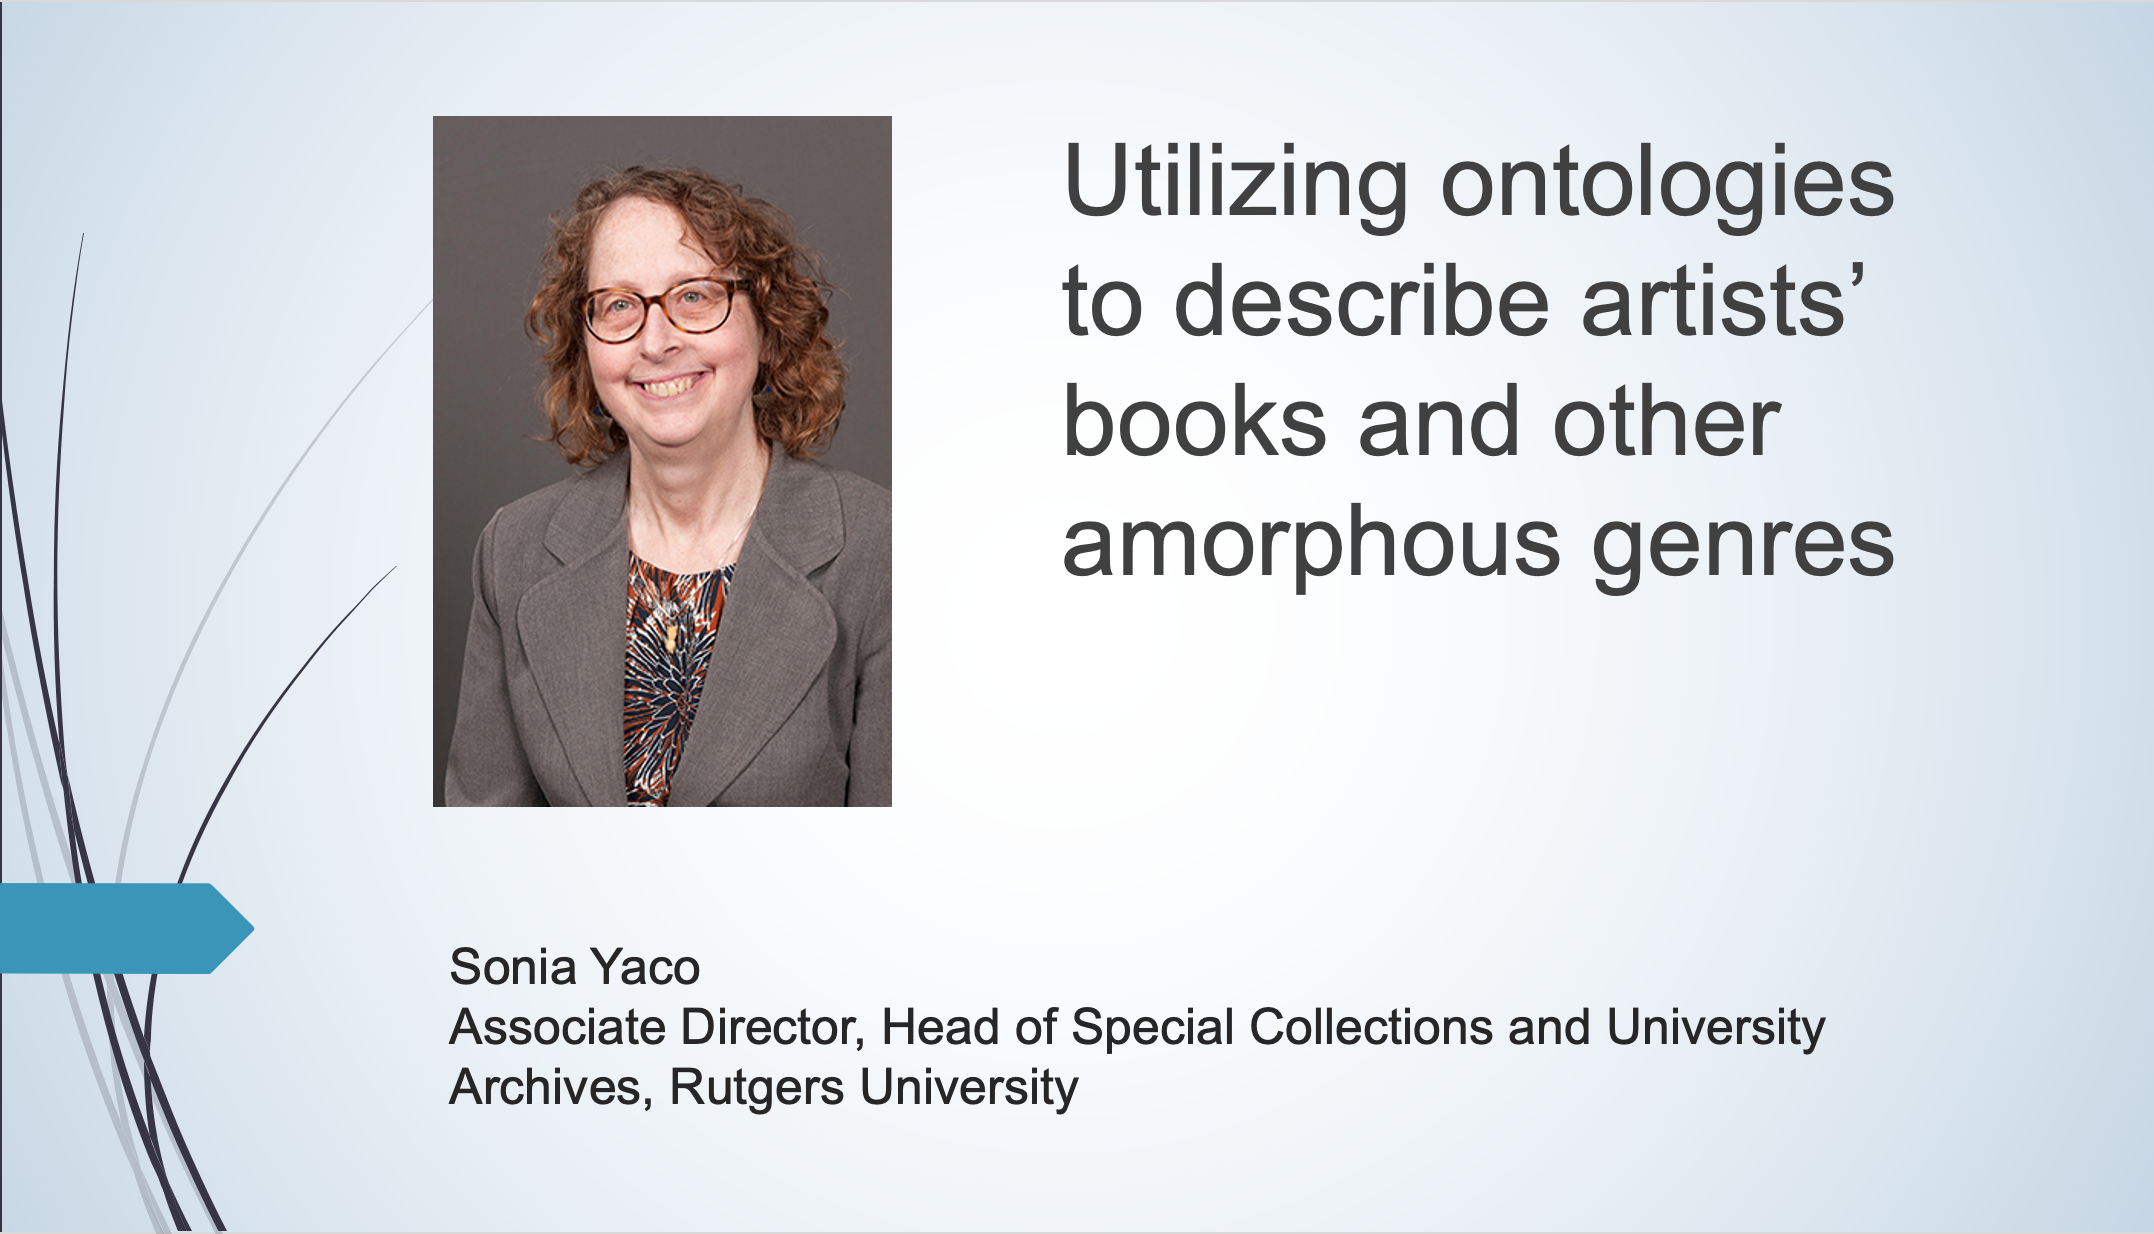 Using ontologies to describe artists’ books and other amorphous genres